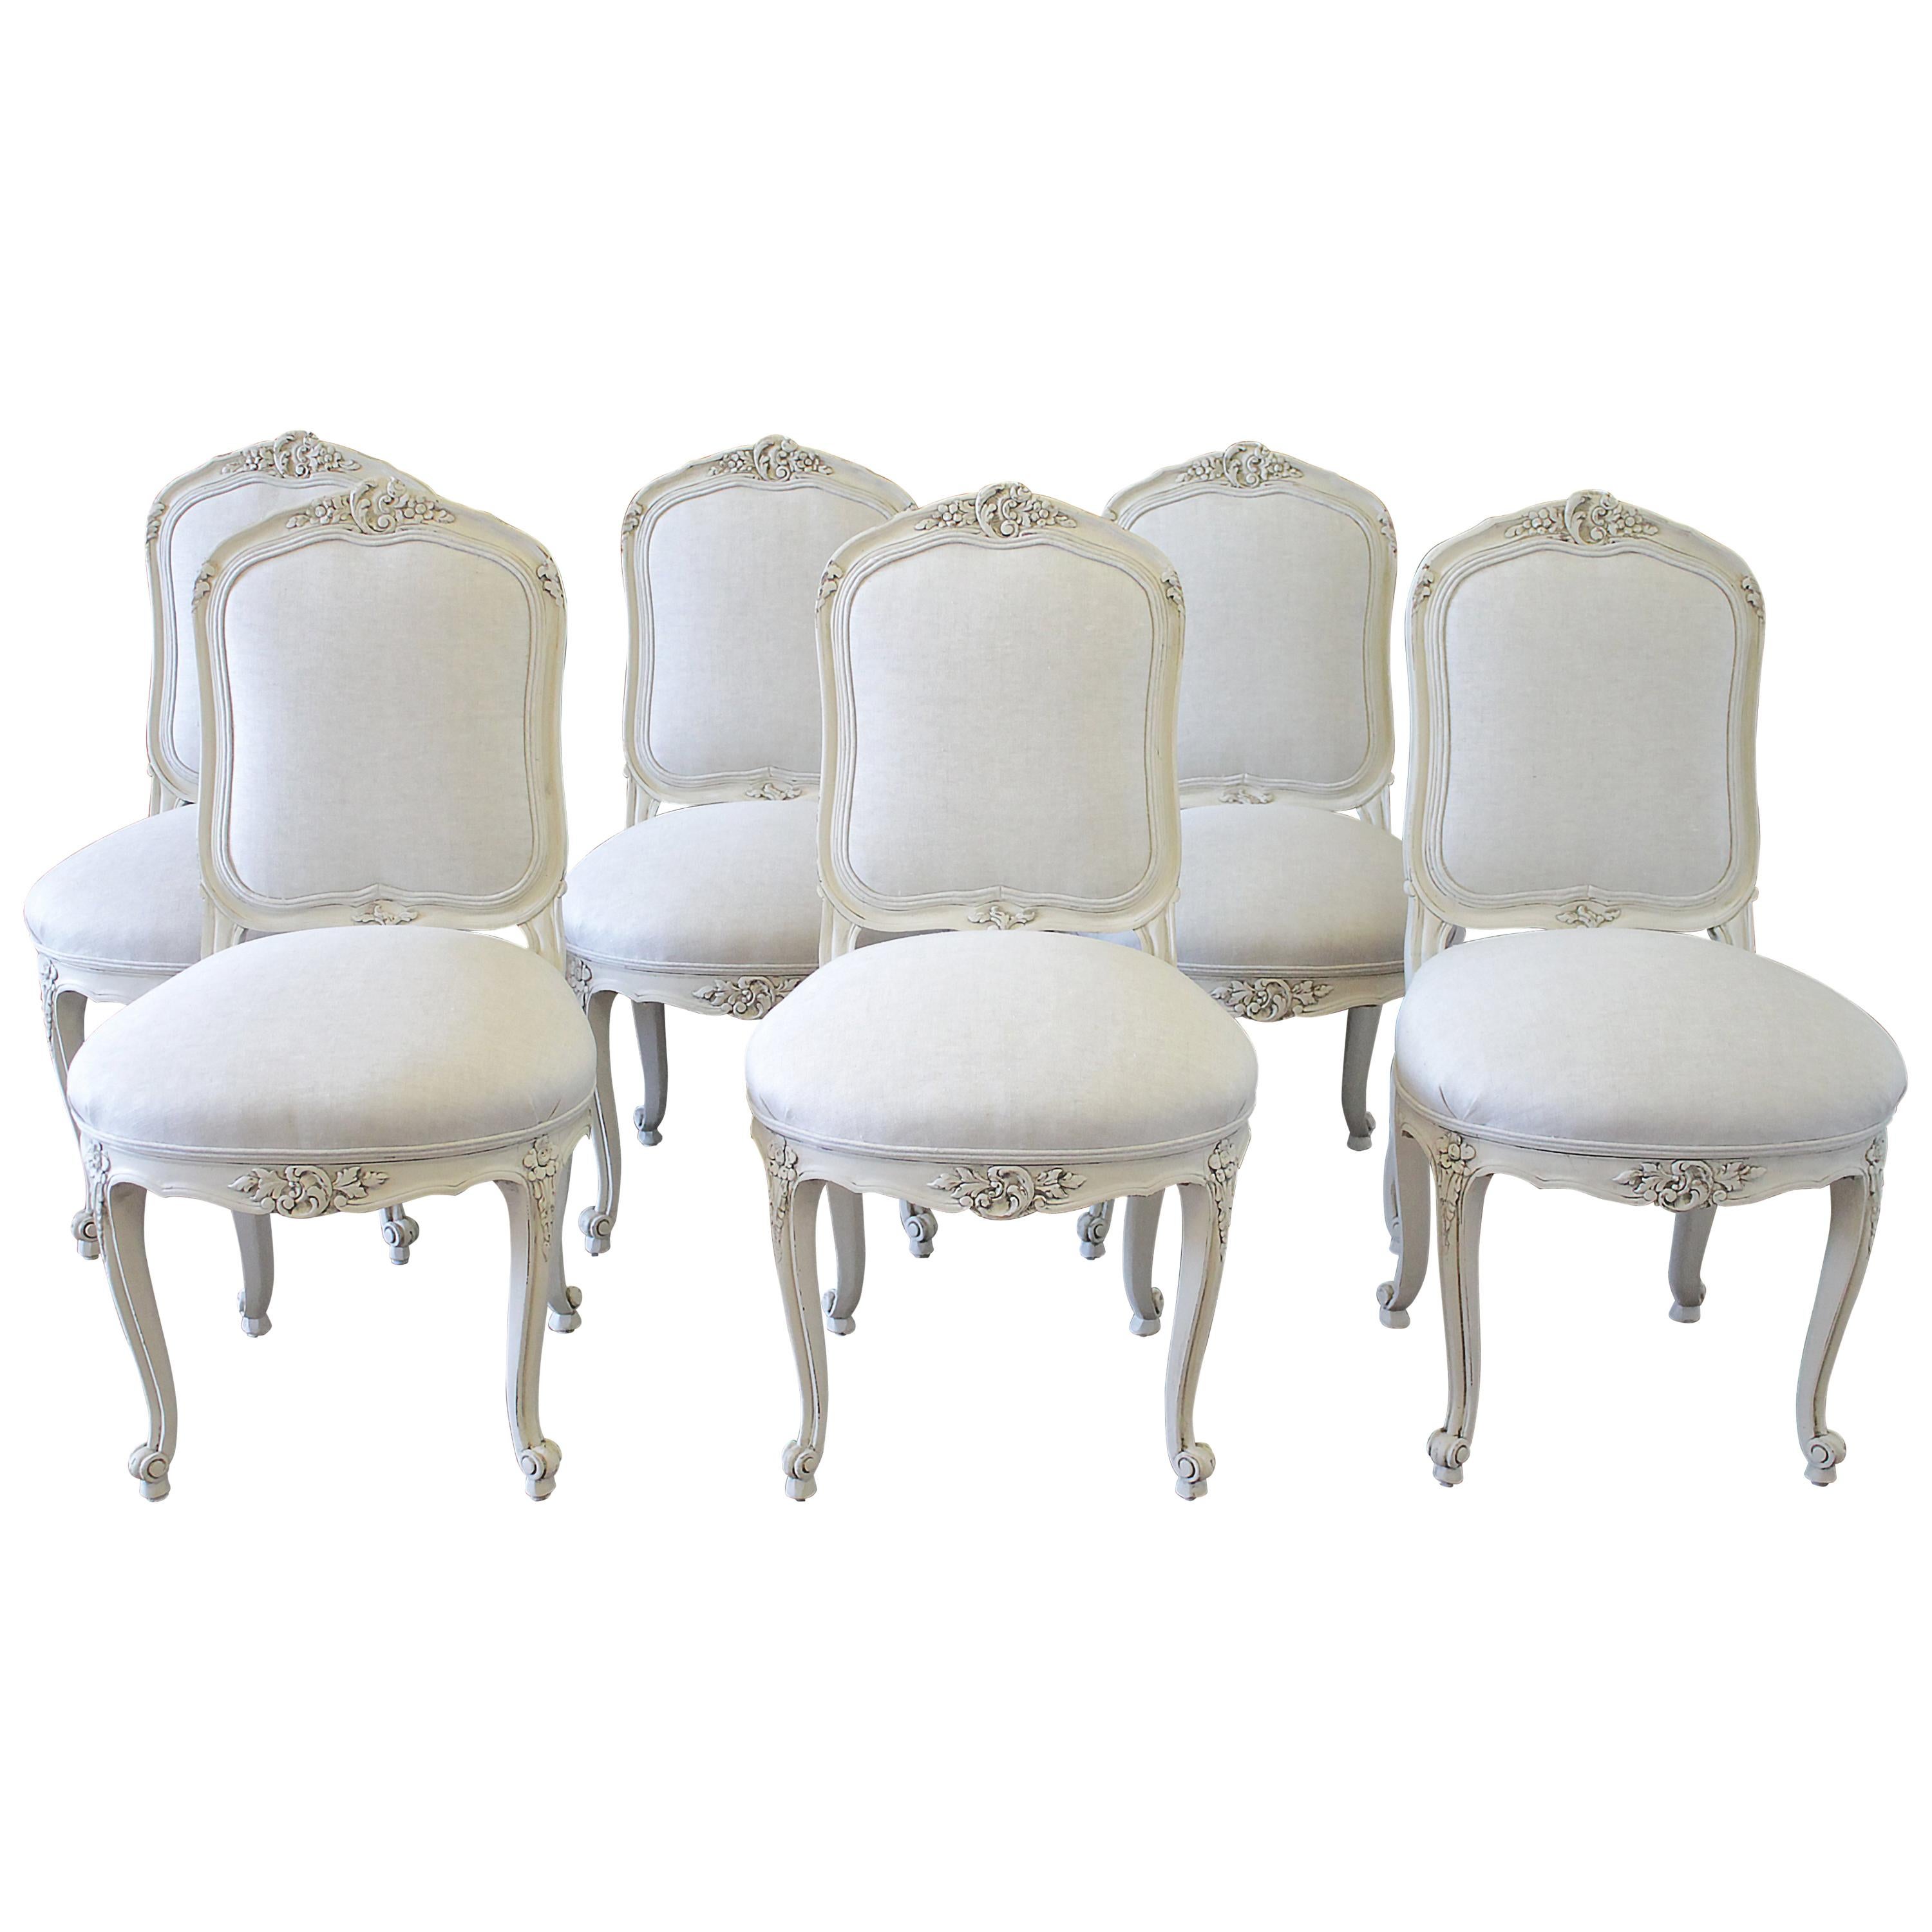 Set of 6 Louis XV Style White Painted French Linen Upholstered Dining Chairs